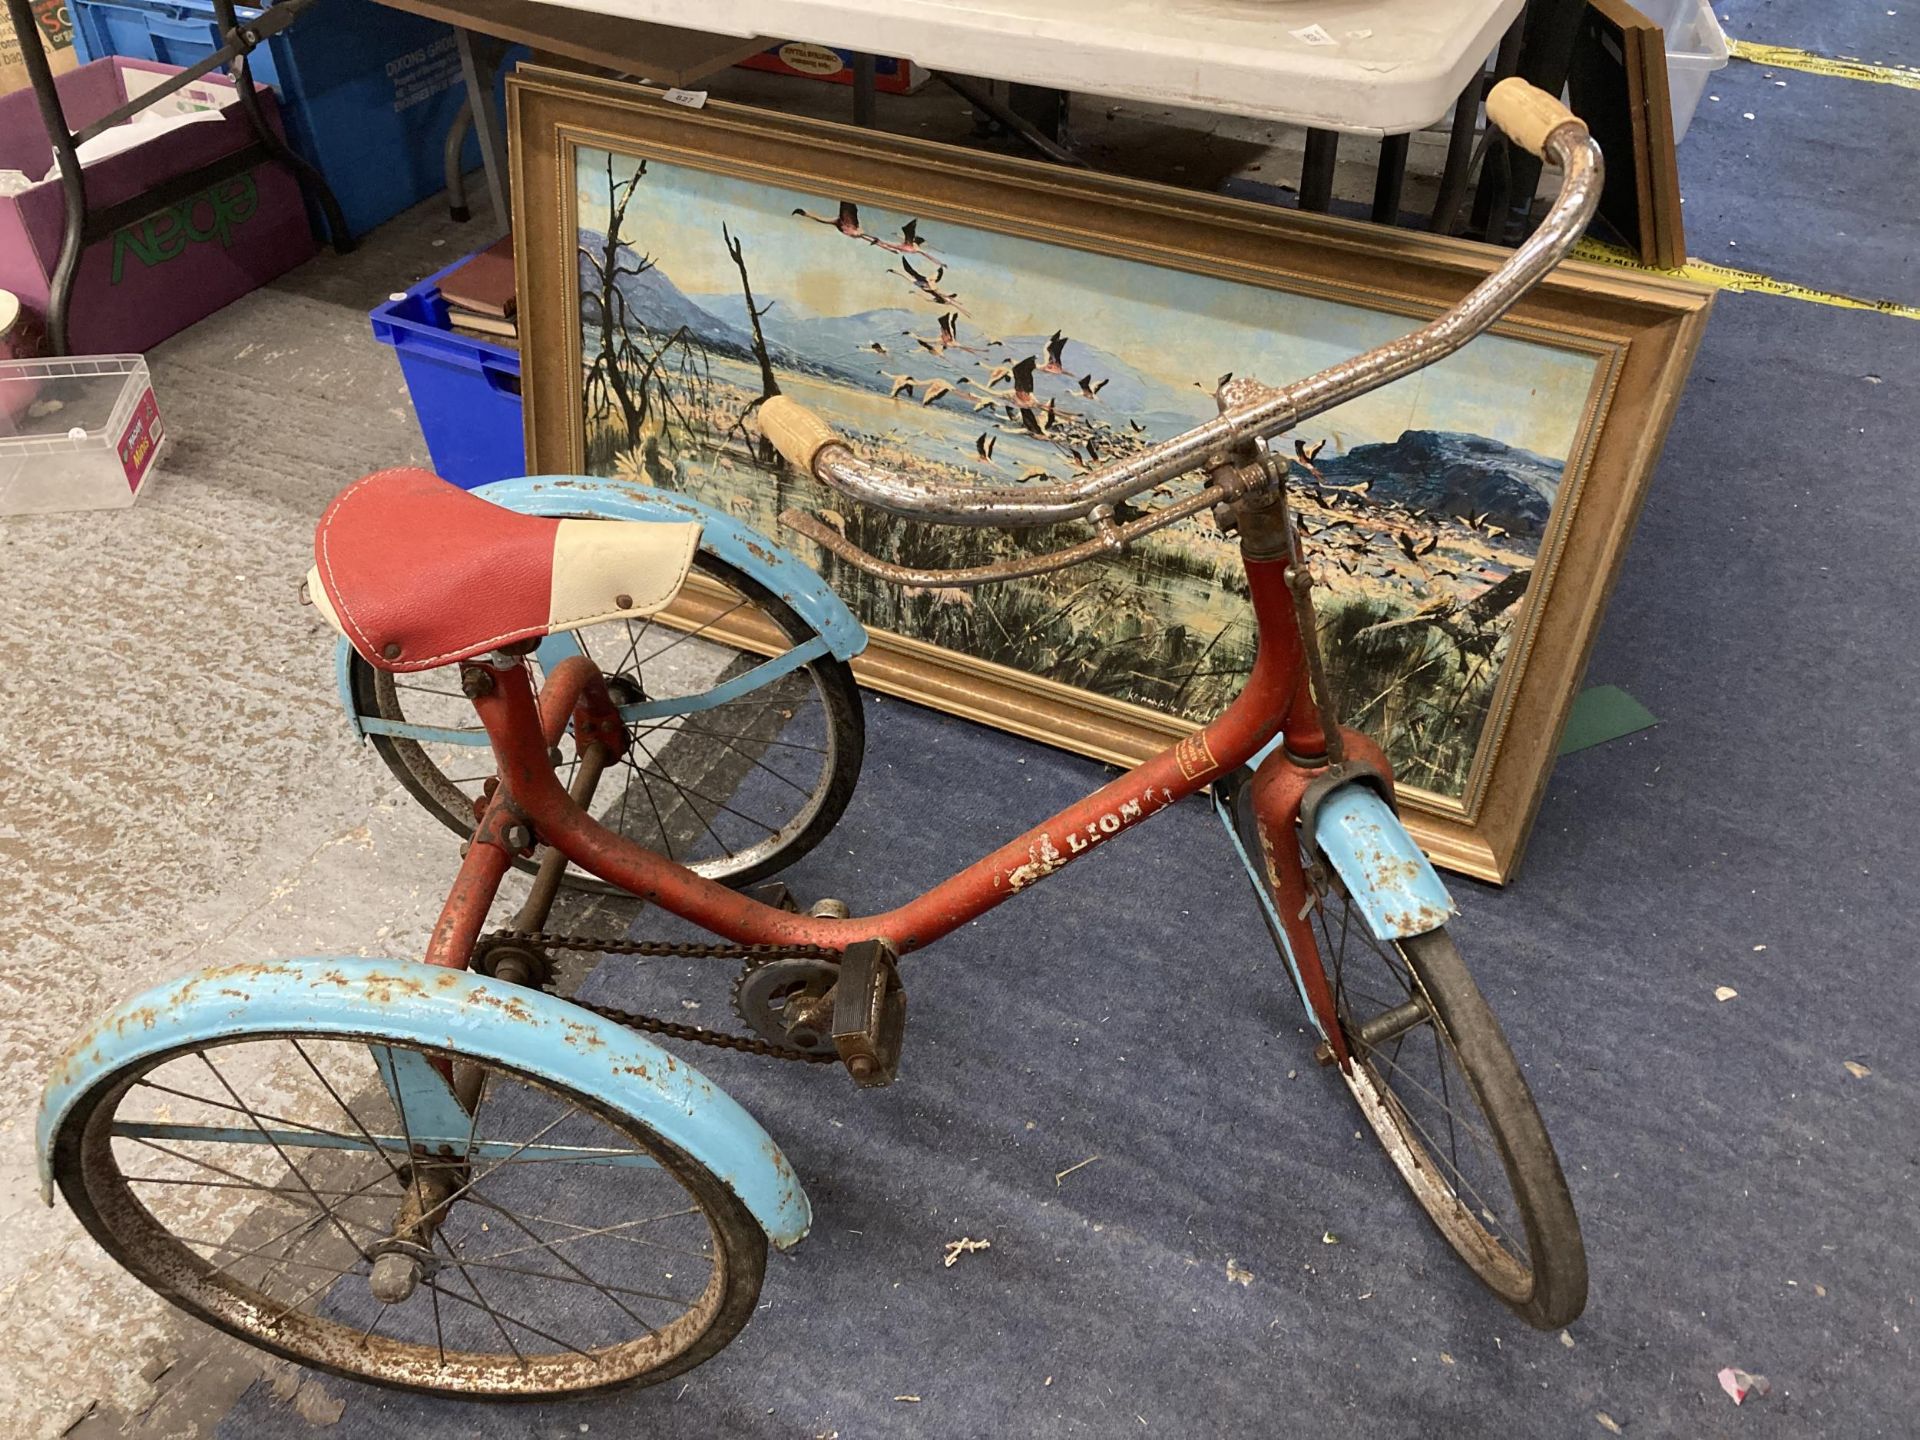 A VINTAGE LION CHILD'S TRICYCLE